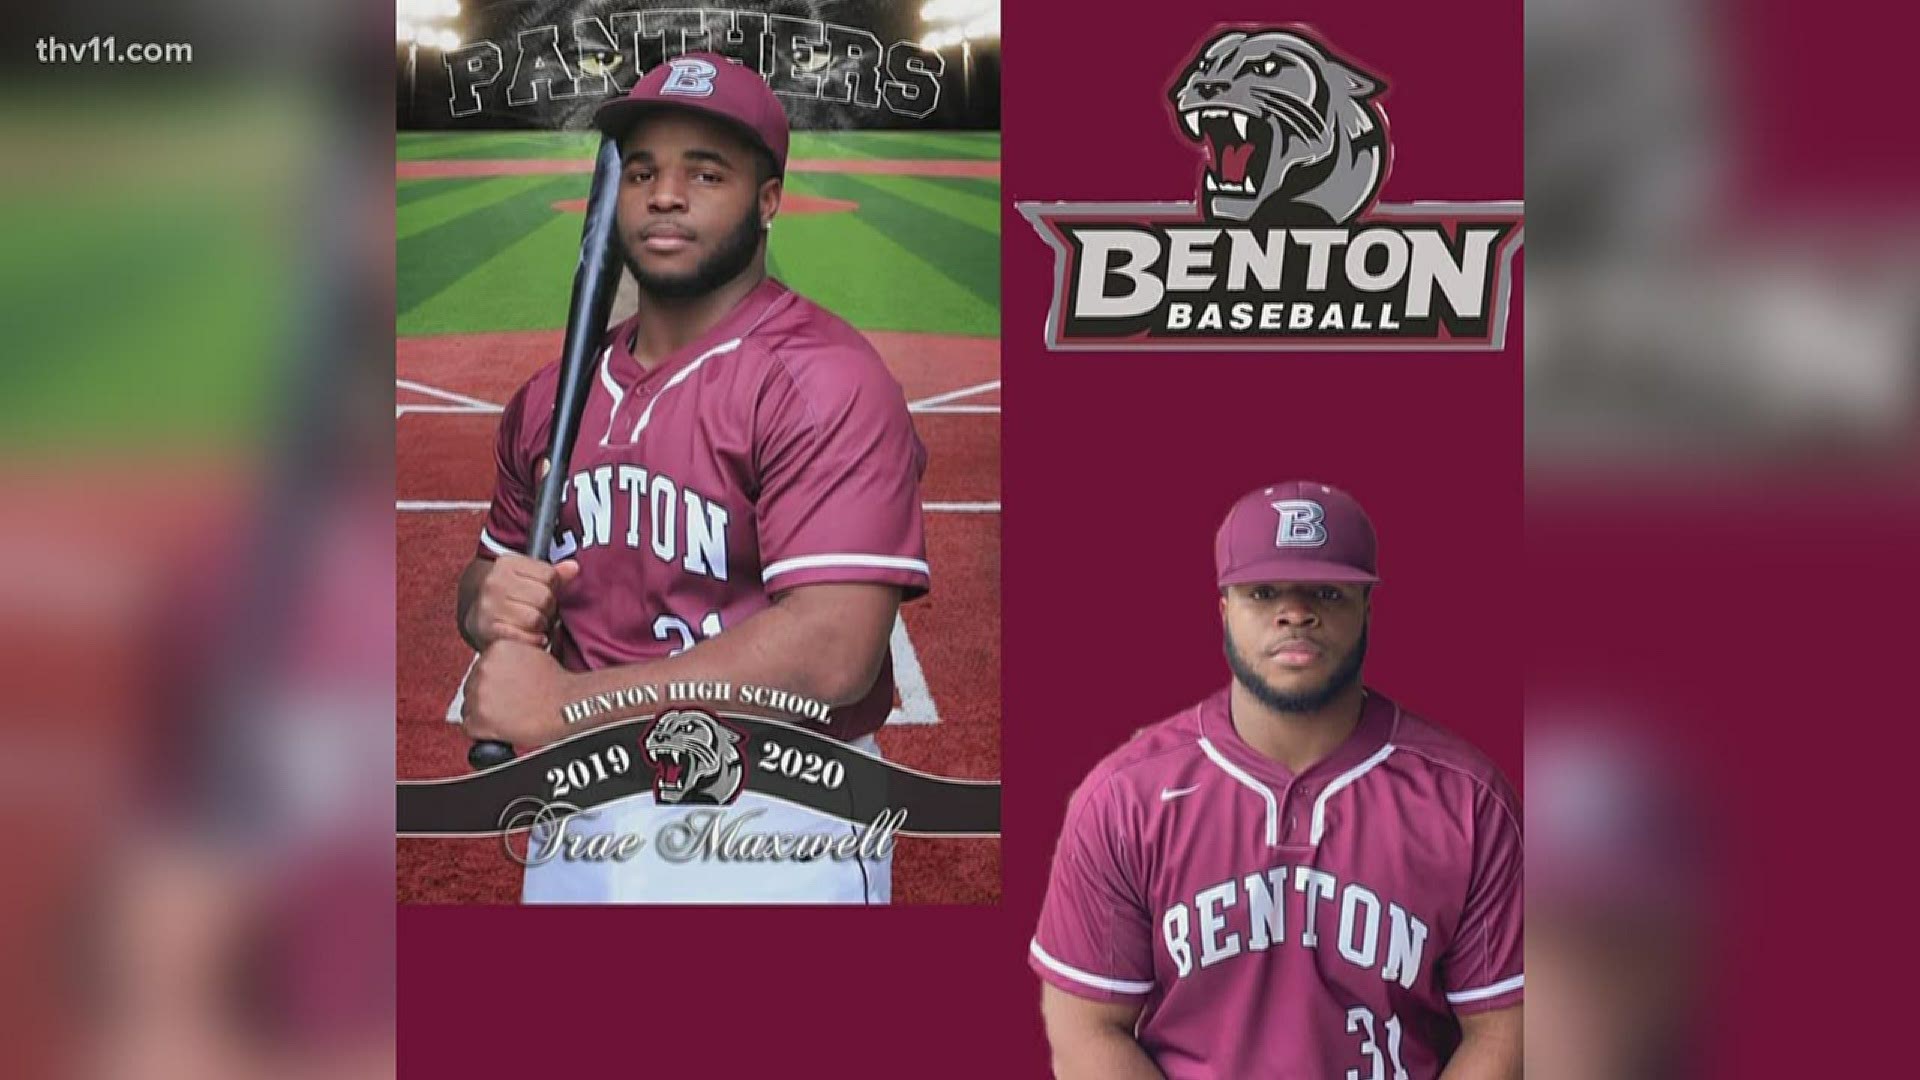 A two-sport athlete at Benton, Maxwell will play football at Arkansas Tech next season and study criminal justice as he pursues a career in the FBI.